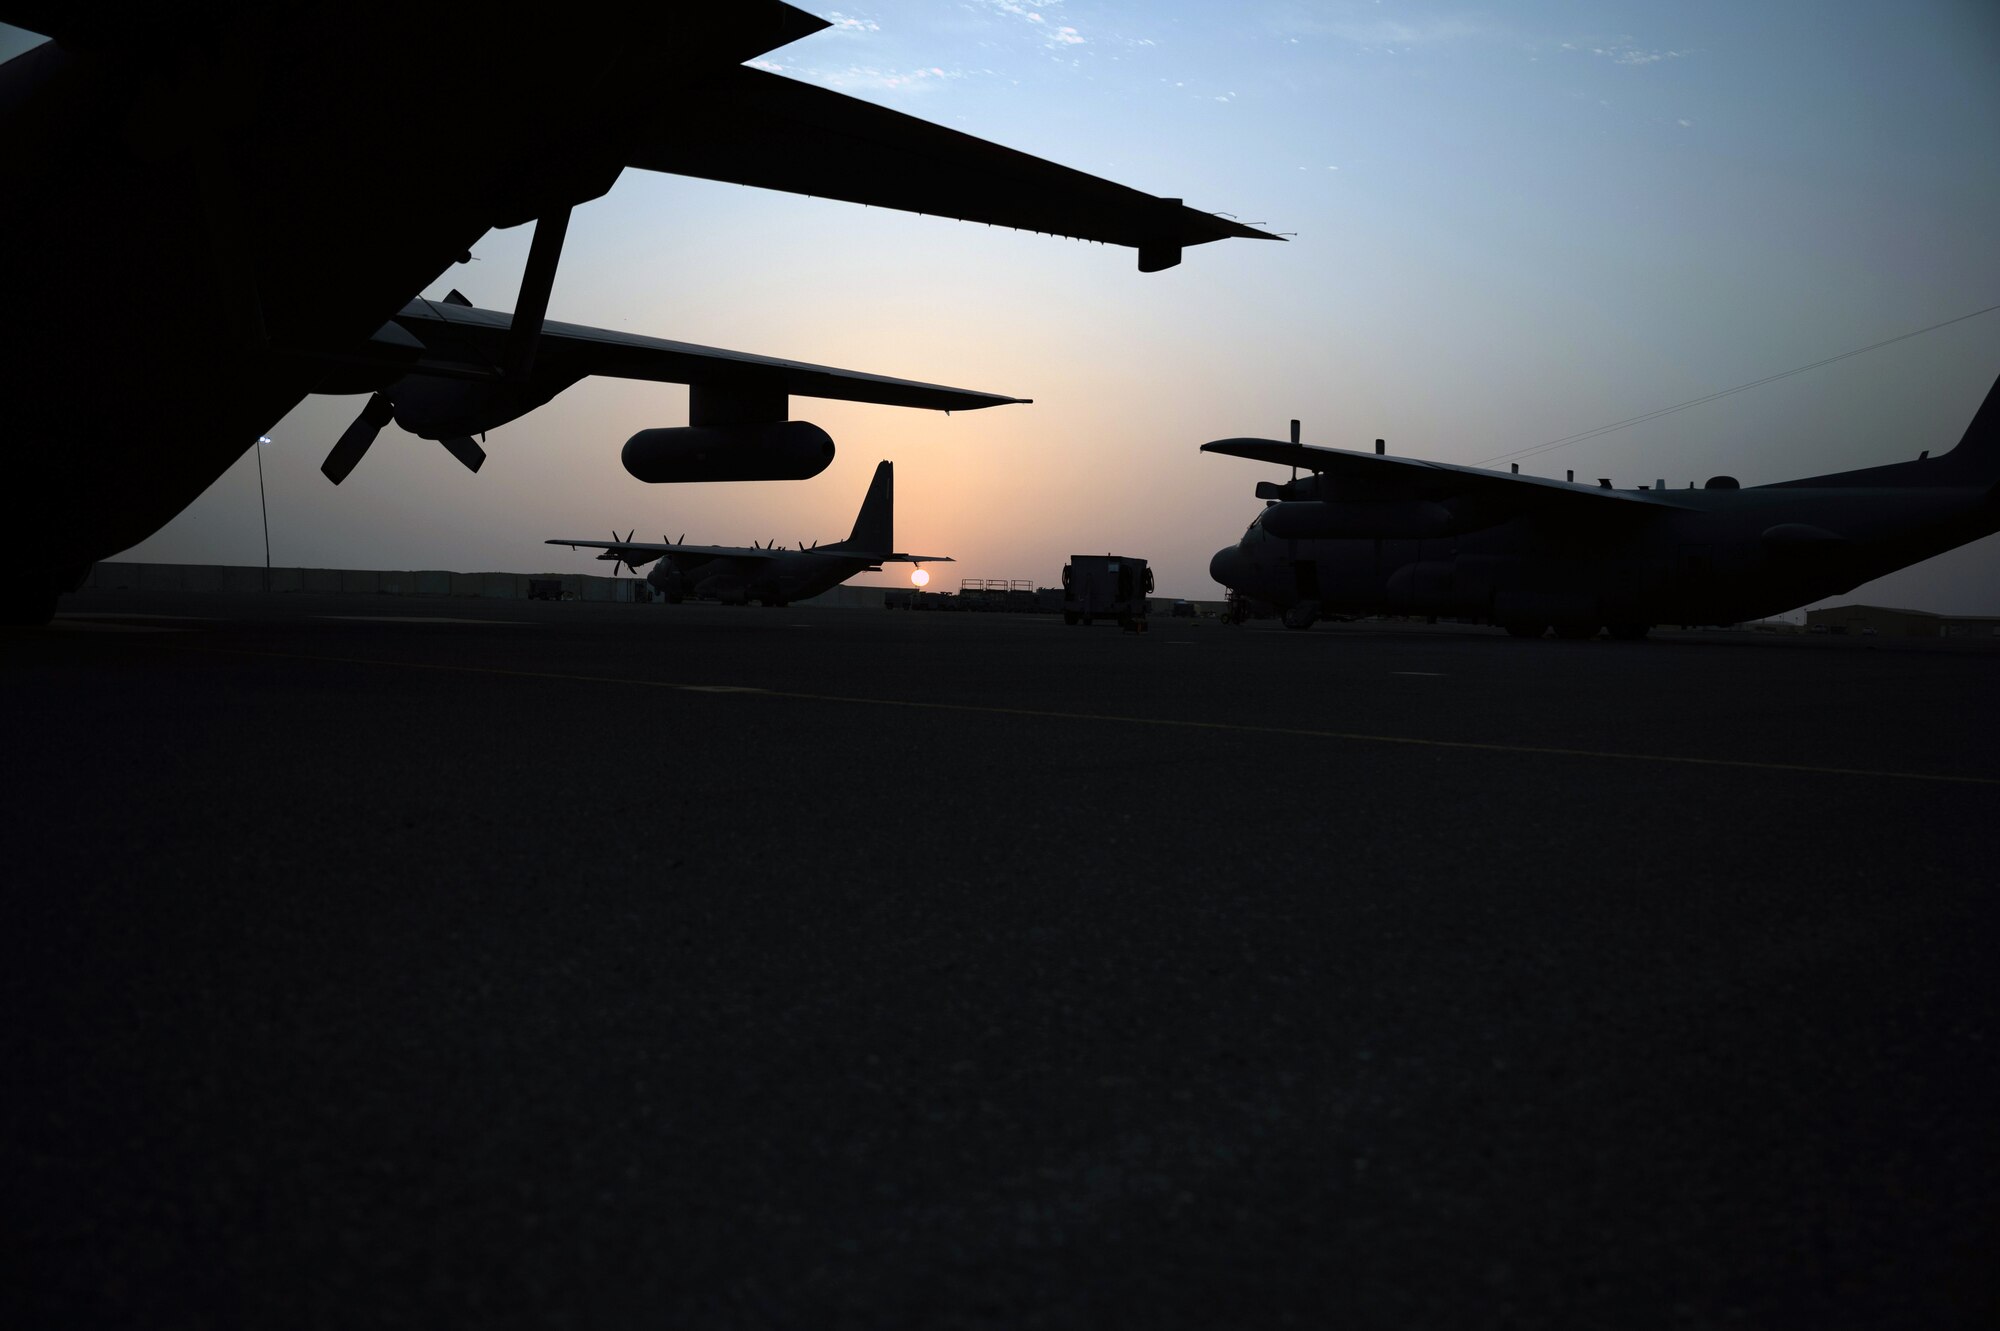 U.S. Air Force C-130 Hercules aircraft sit on the flightline during sunset